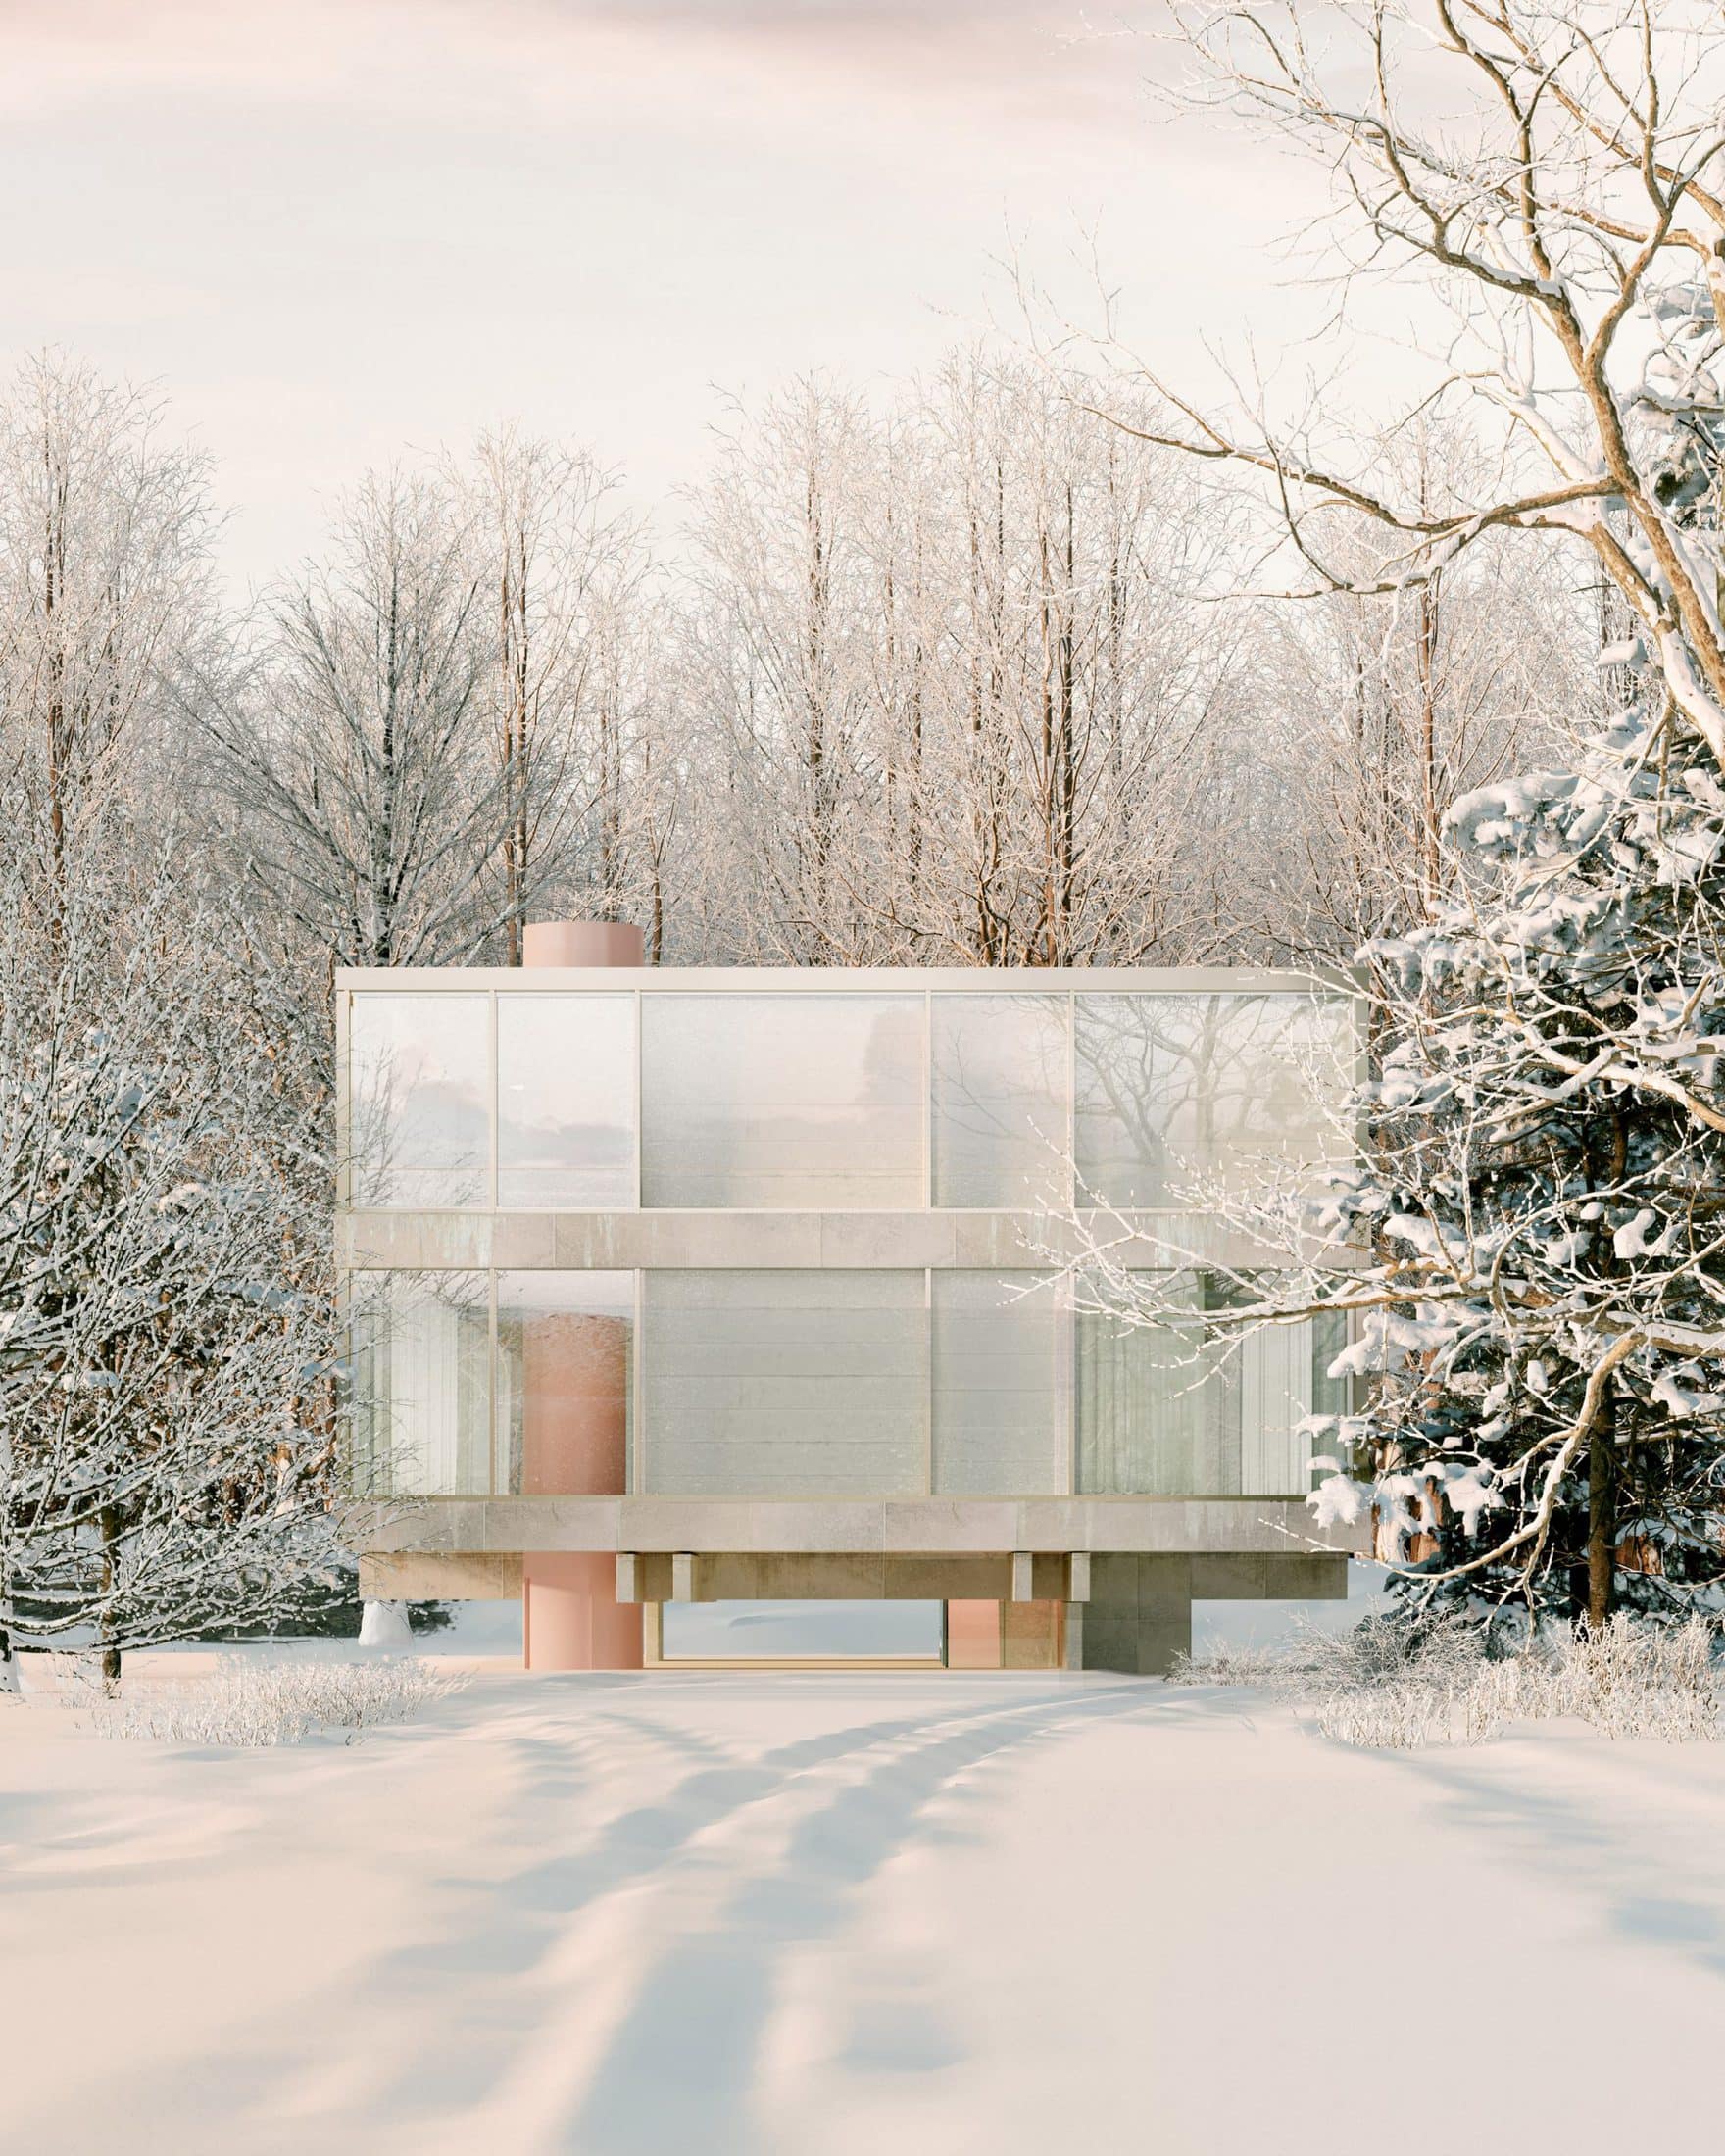 andres reisigner winter house metaverse architecture dezeen 2364 col 2 scaled 1